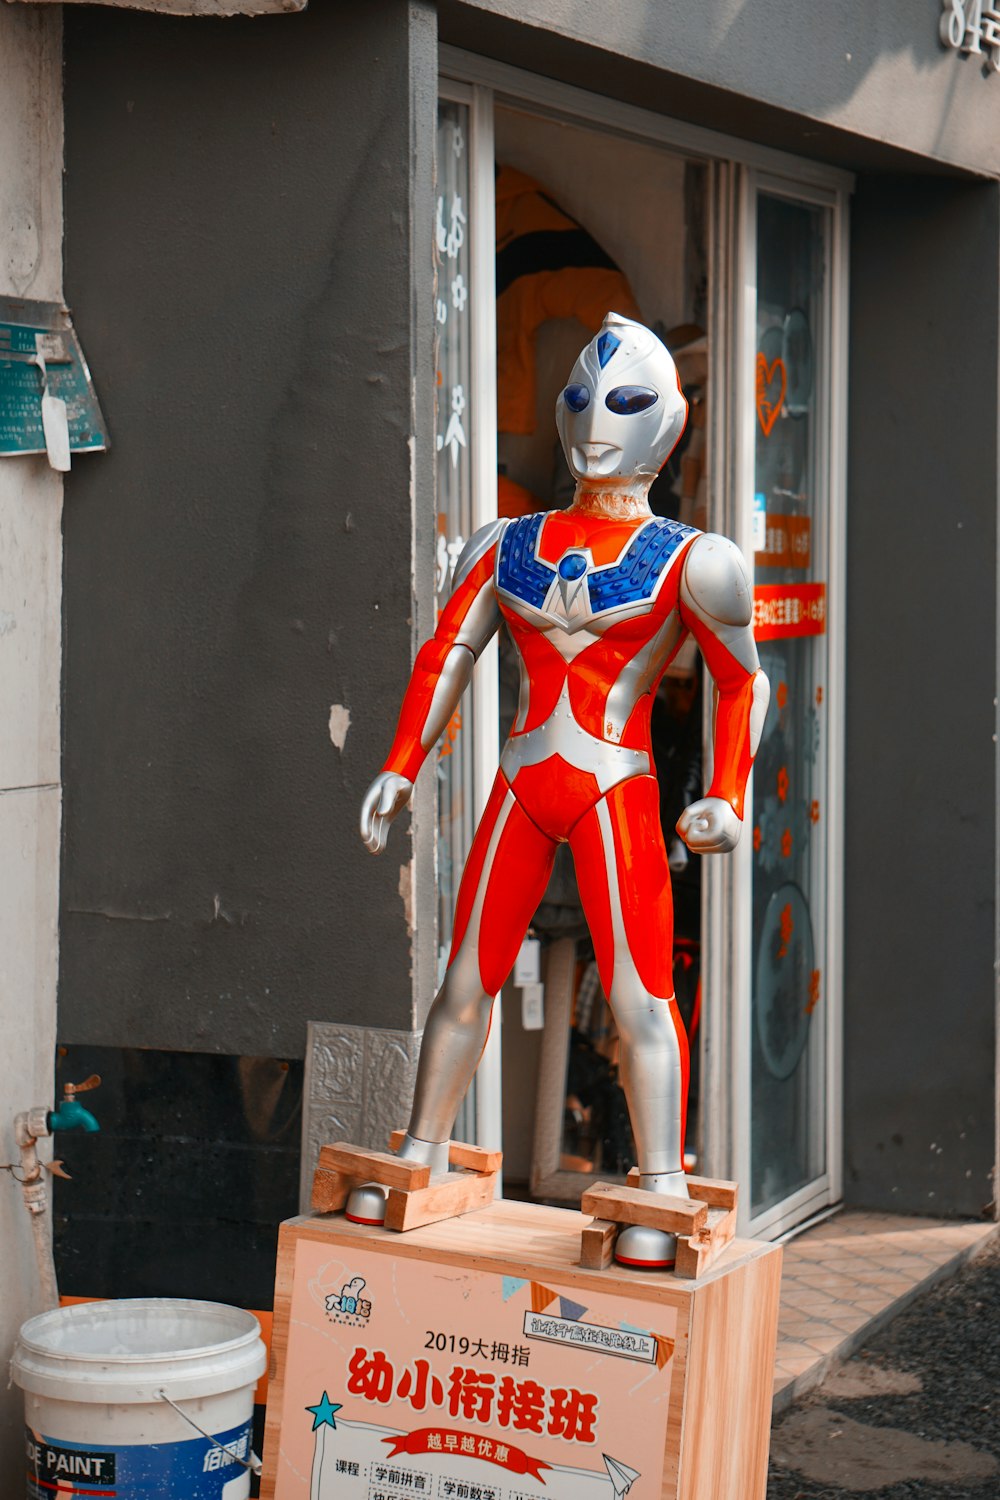 man in red and white power ranger costume standing on brown wooden seat